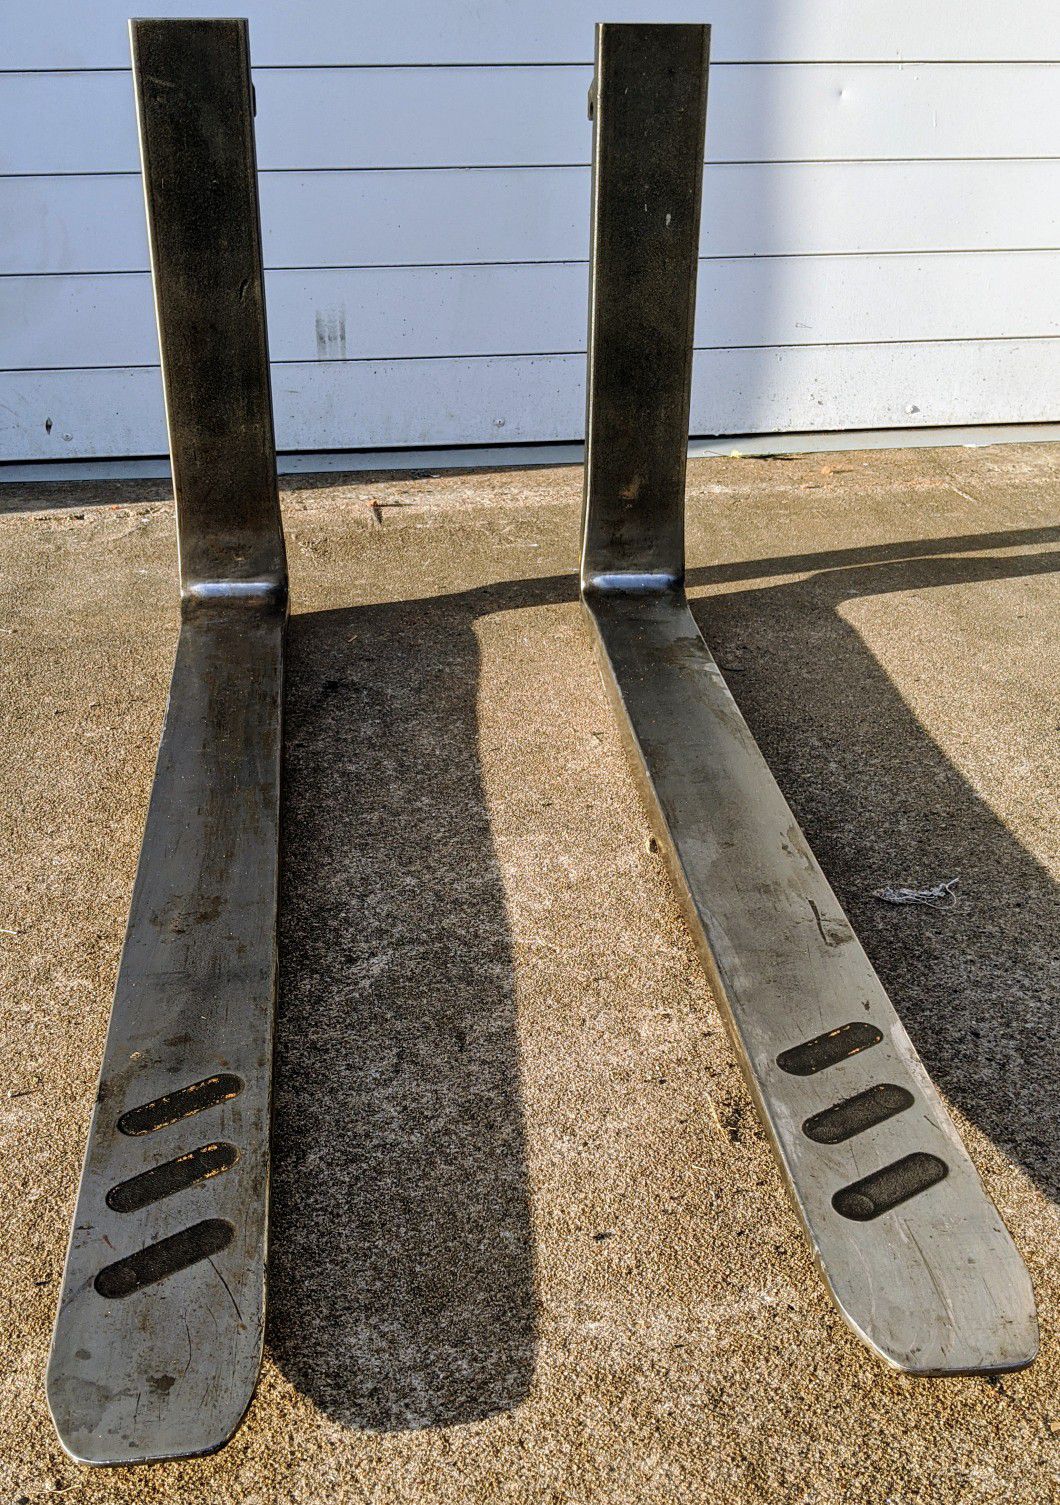 Pair of Class 2 42-inch Forklift Forks Tines Blades